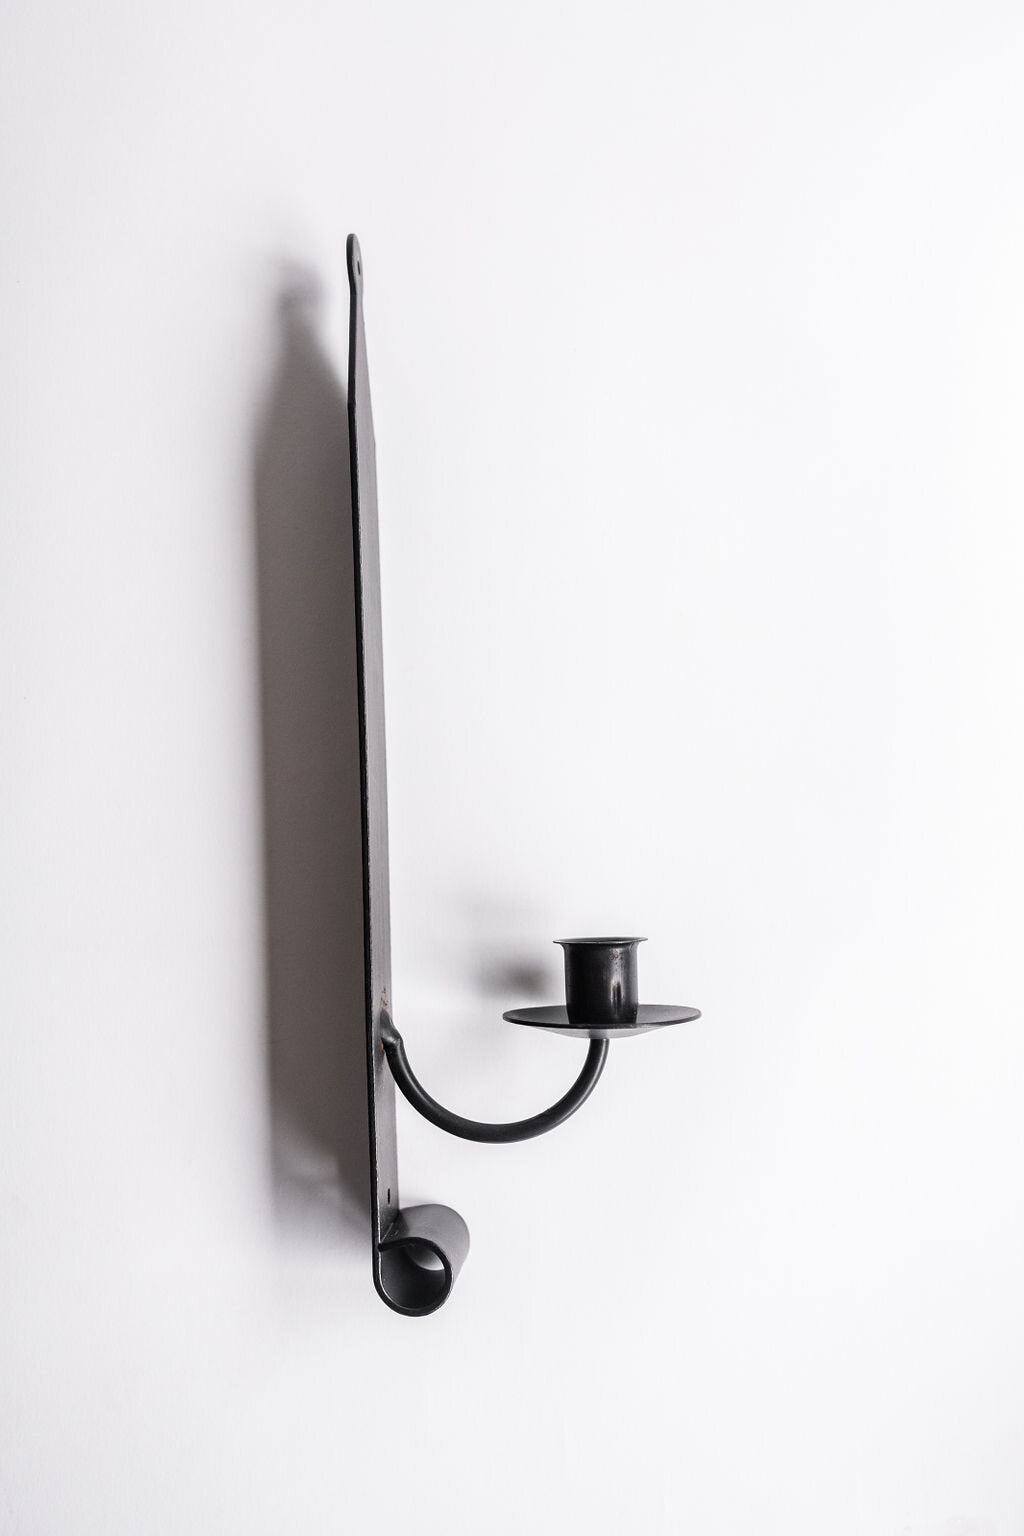 The Metal Sconce